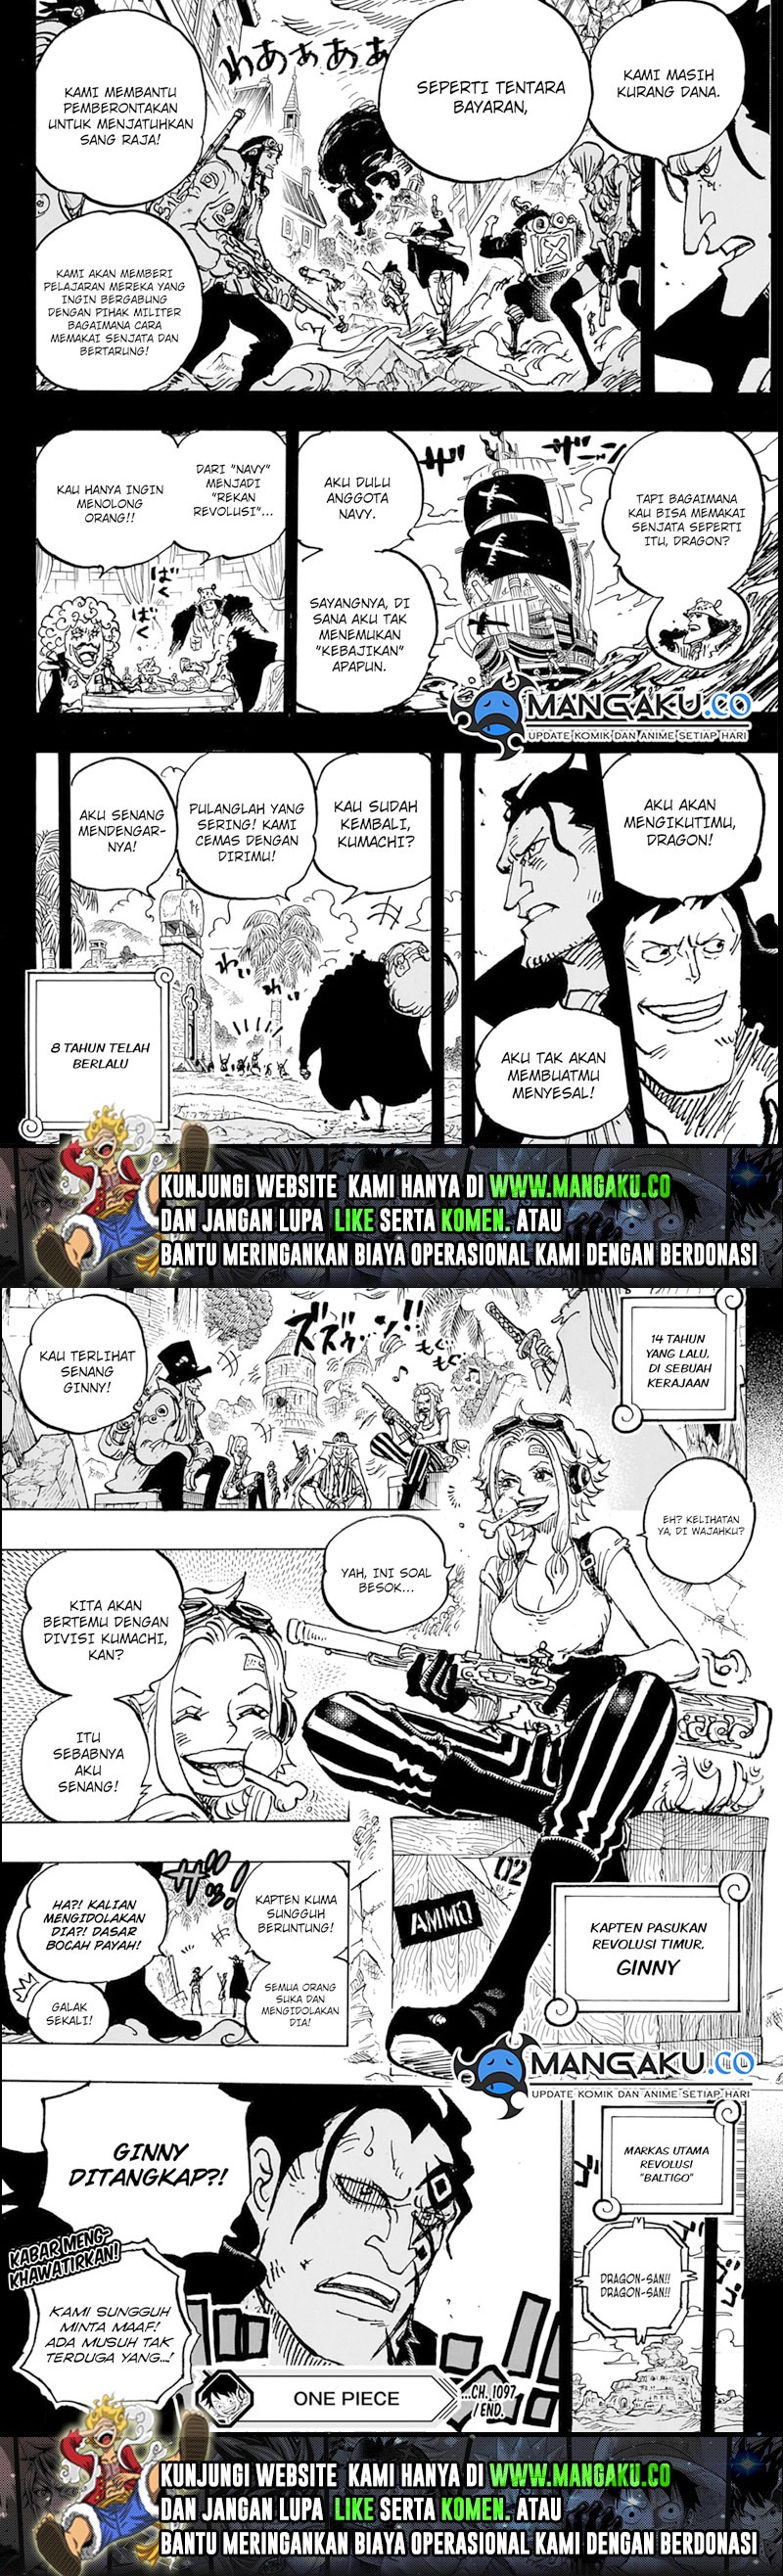 One Piece Chapter 1097 Image 2